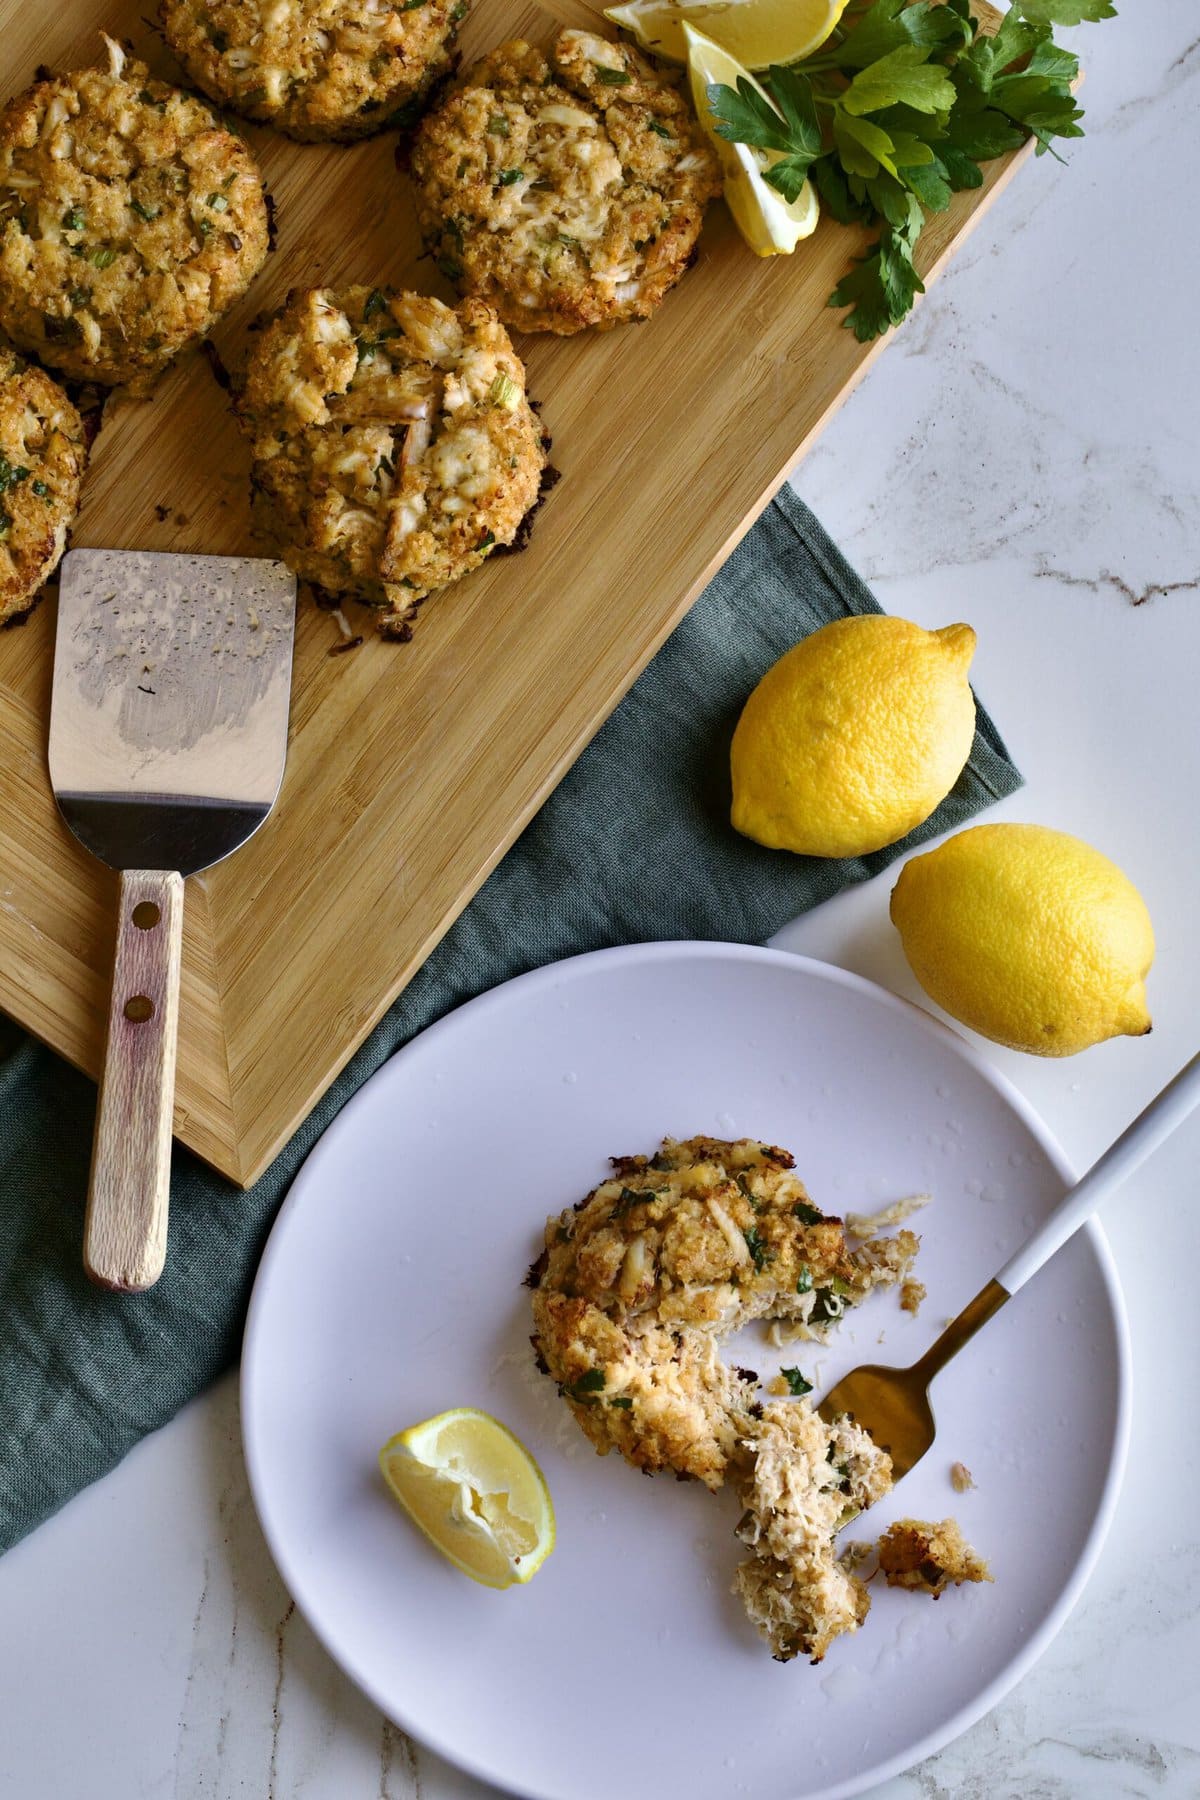 crab cakes displayed on wooden board with lemon and parsley. one crab cake on a white plate. with bite taken out of it.